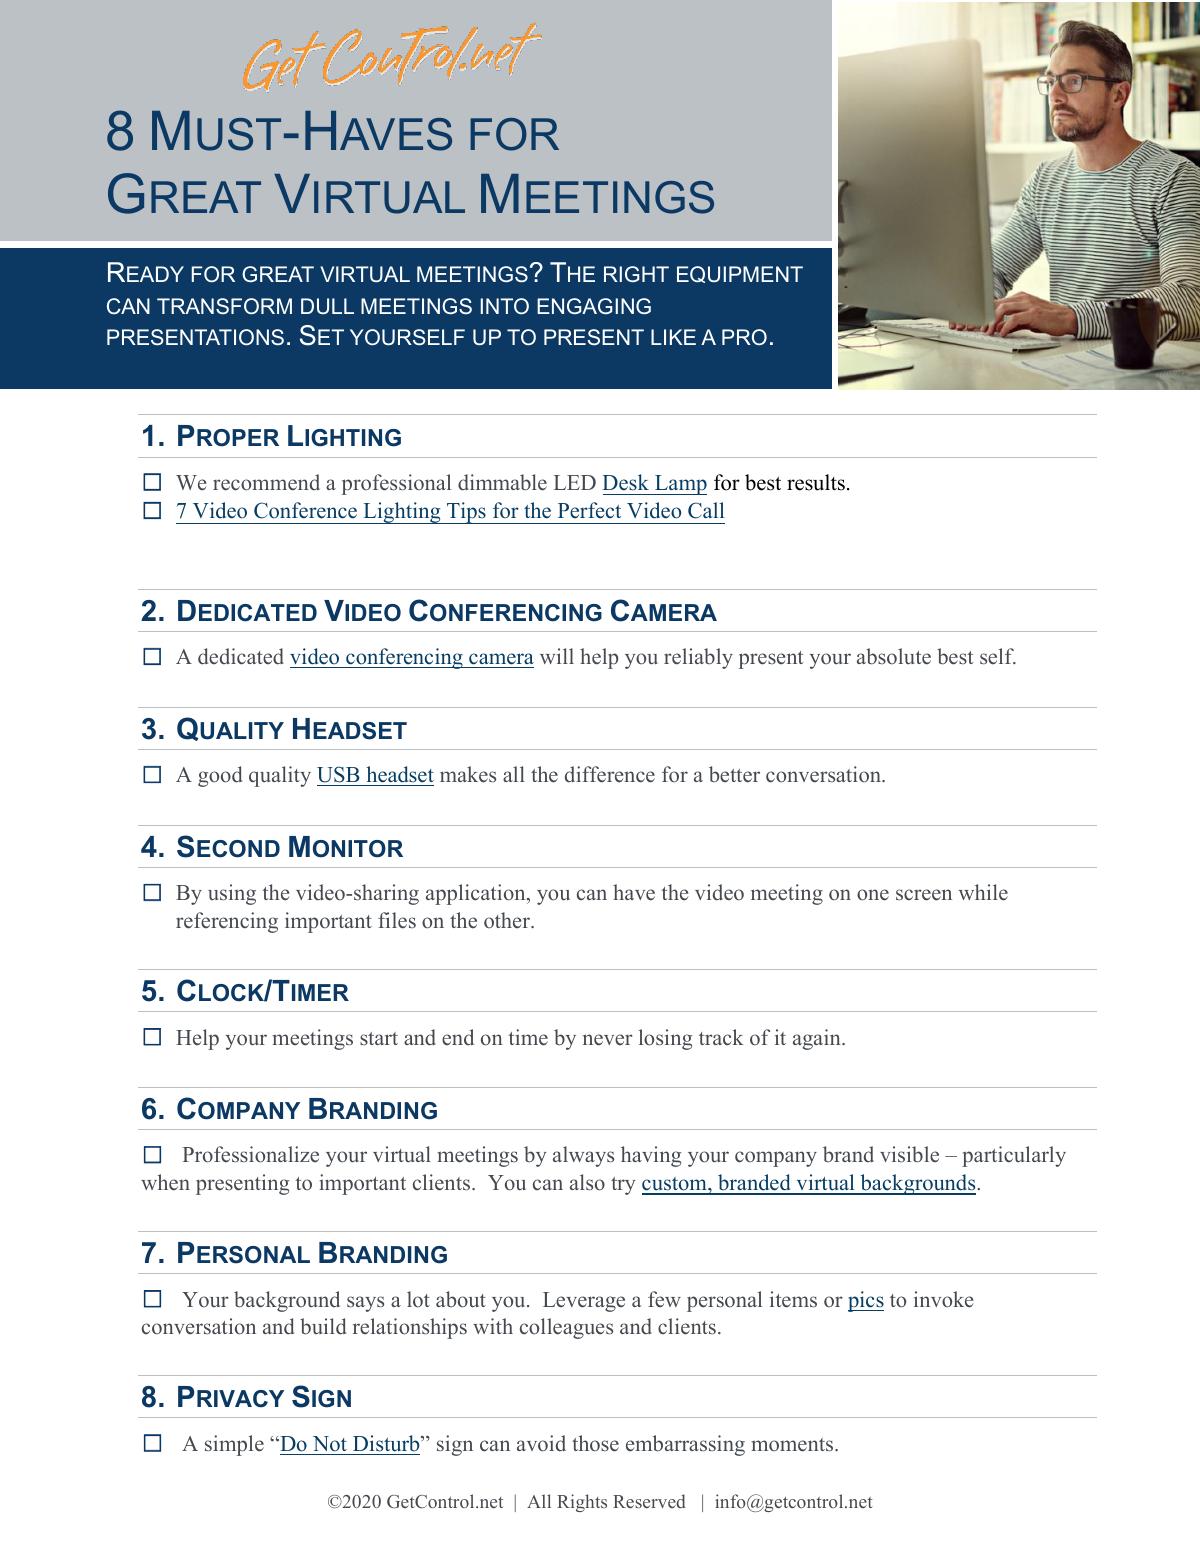 8 Must-Have Tech Items for Great Virtual Meetings